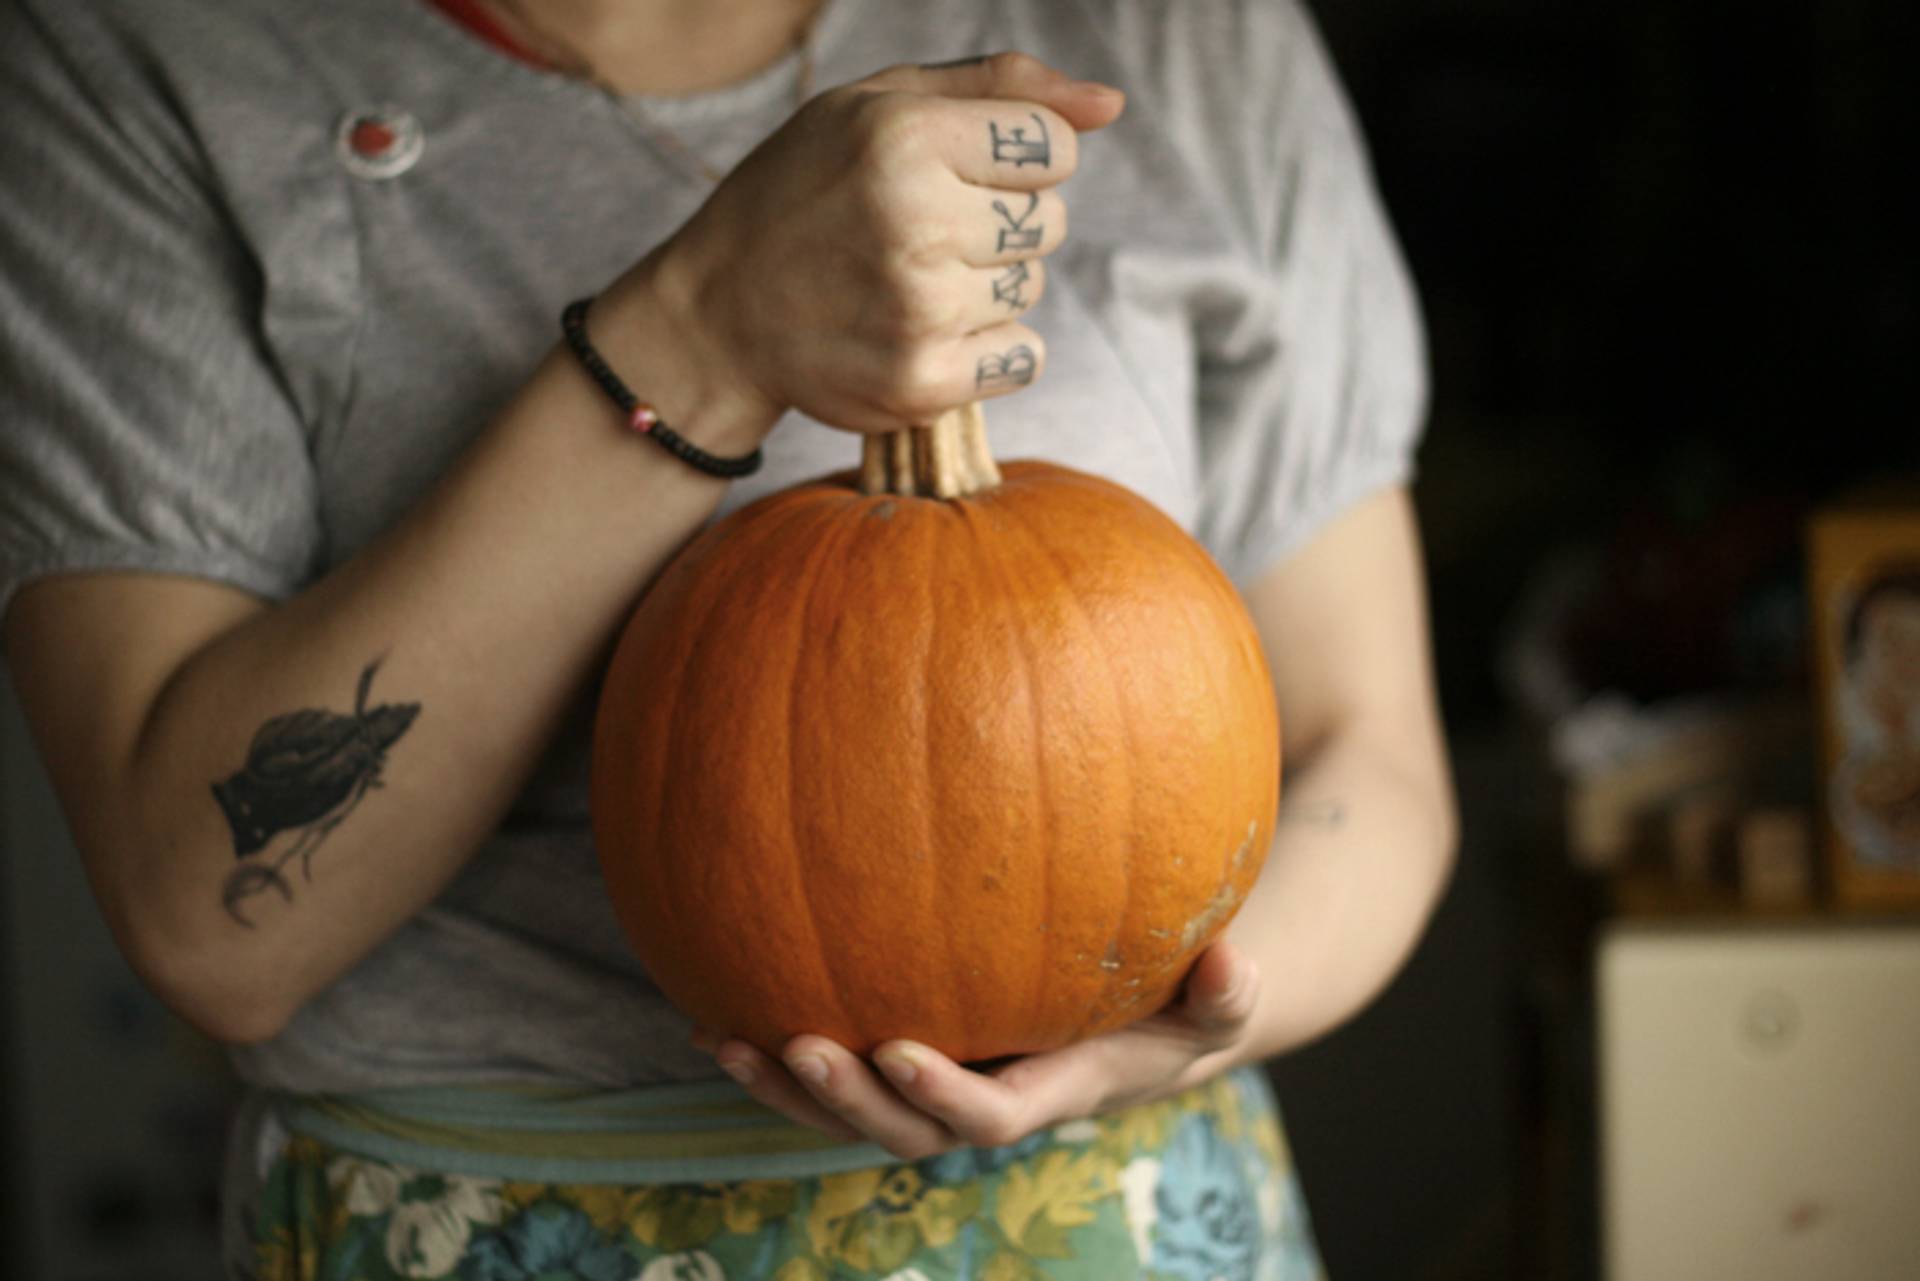 Americans will eat anything that tastes like pumpkin